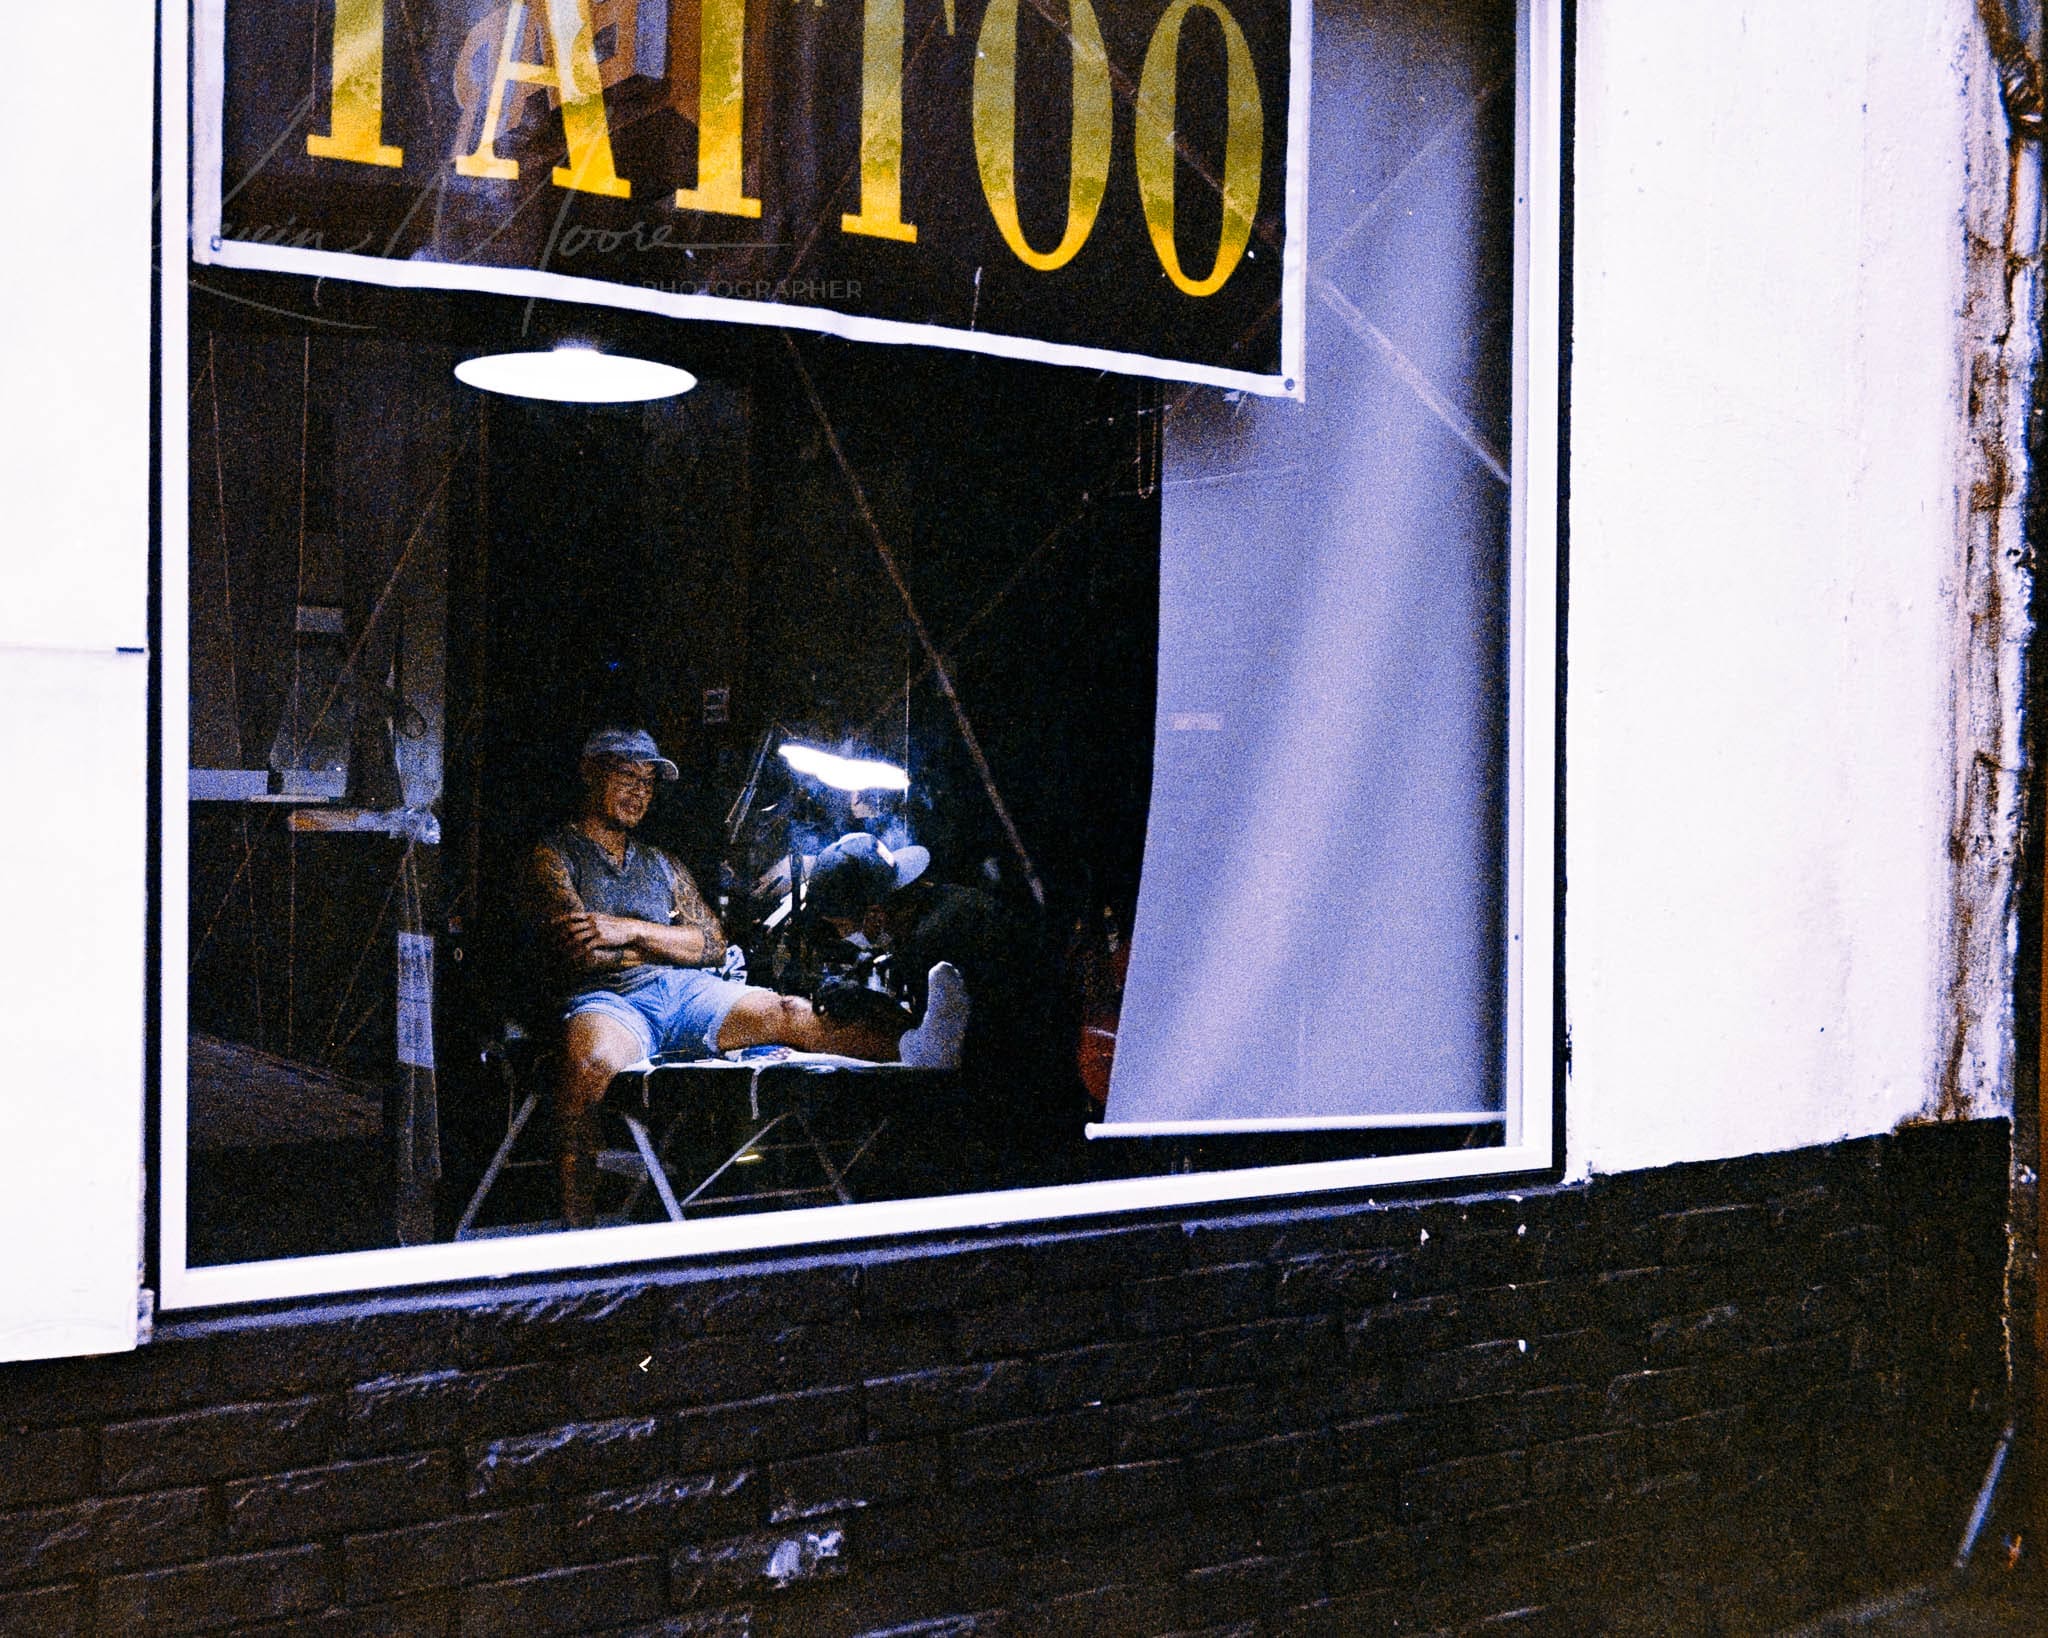 Individual in a dim-lit tattoo parlor reflecting on art, contrasted with bustling city life.